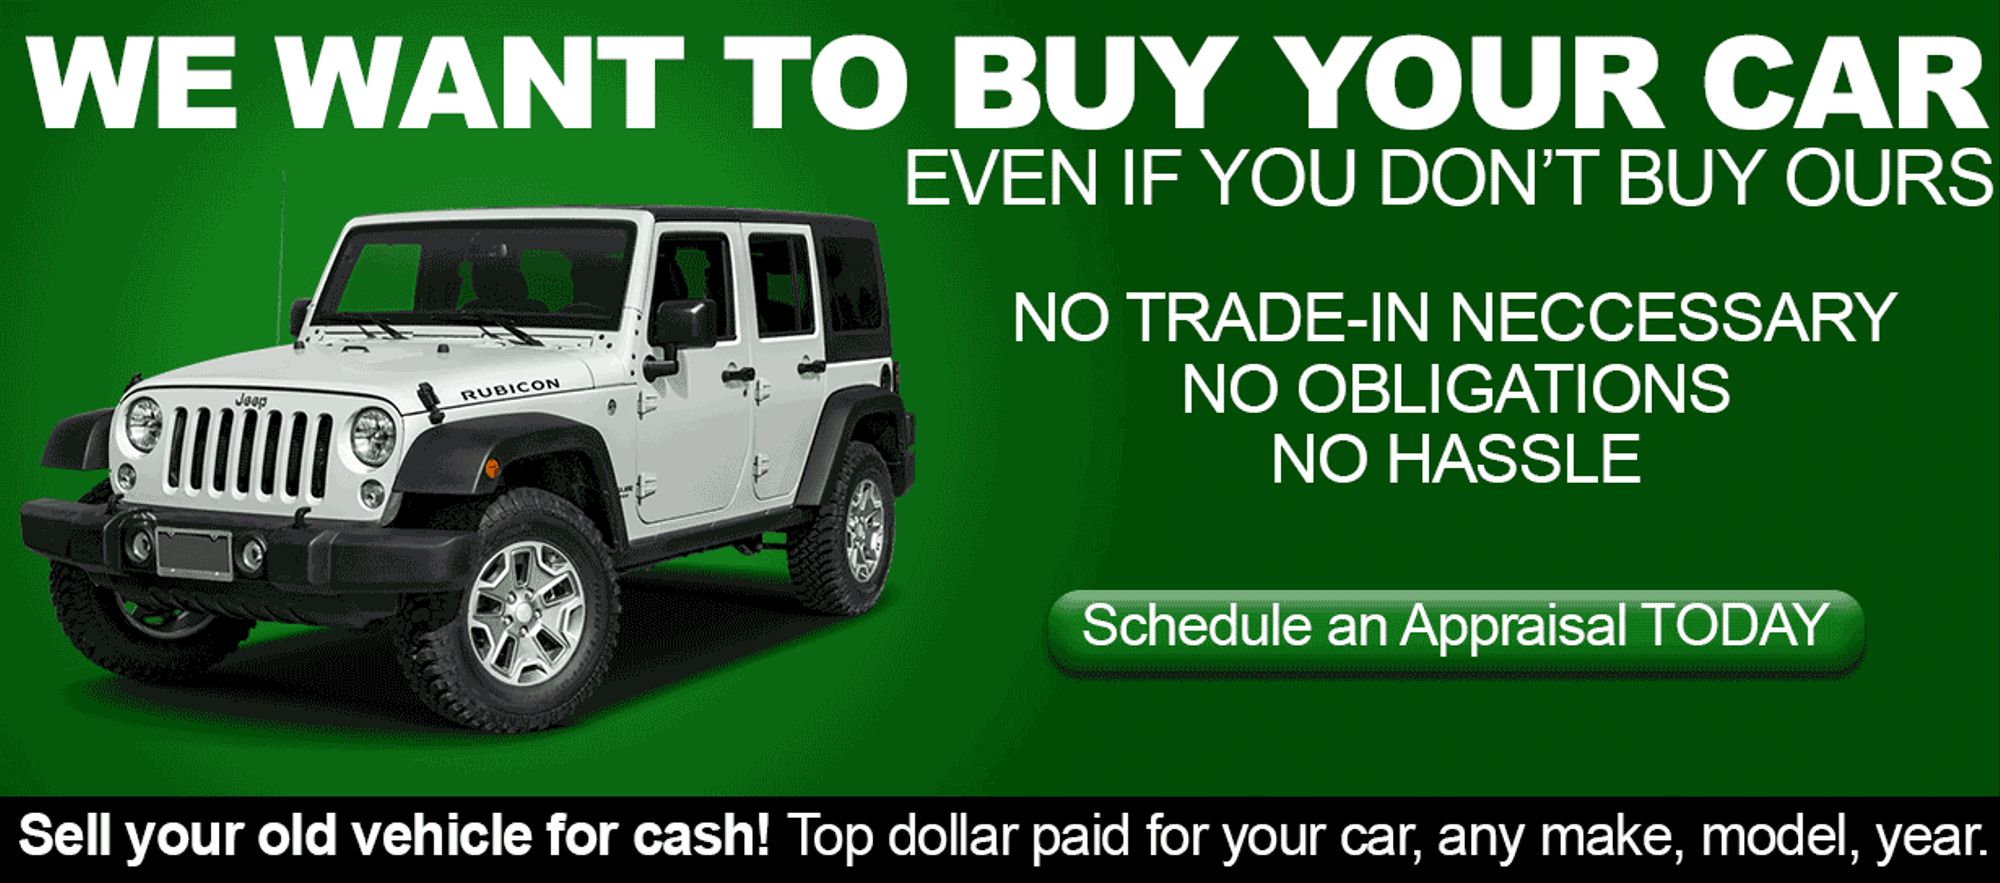 Sell your car for cash